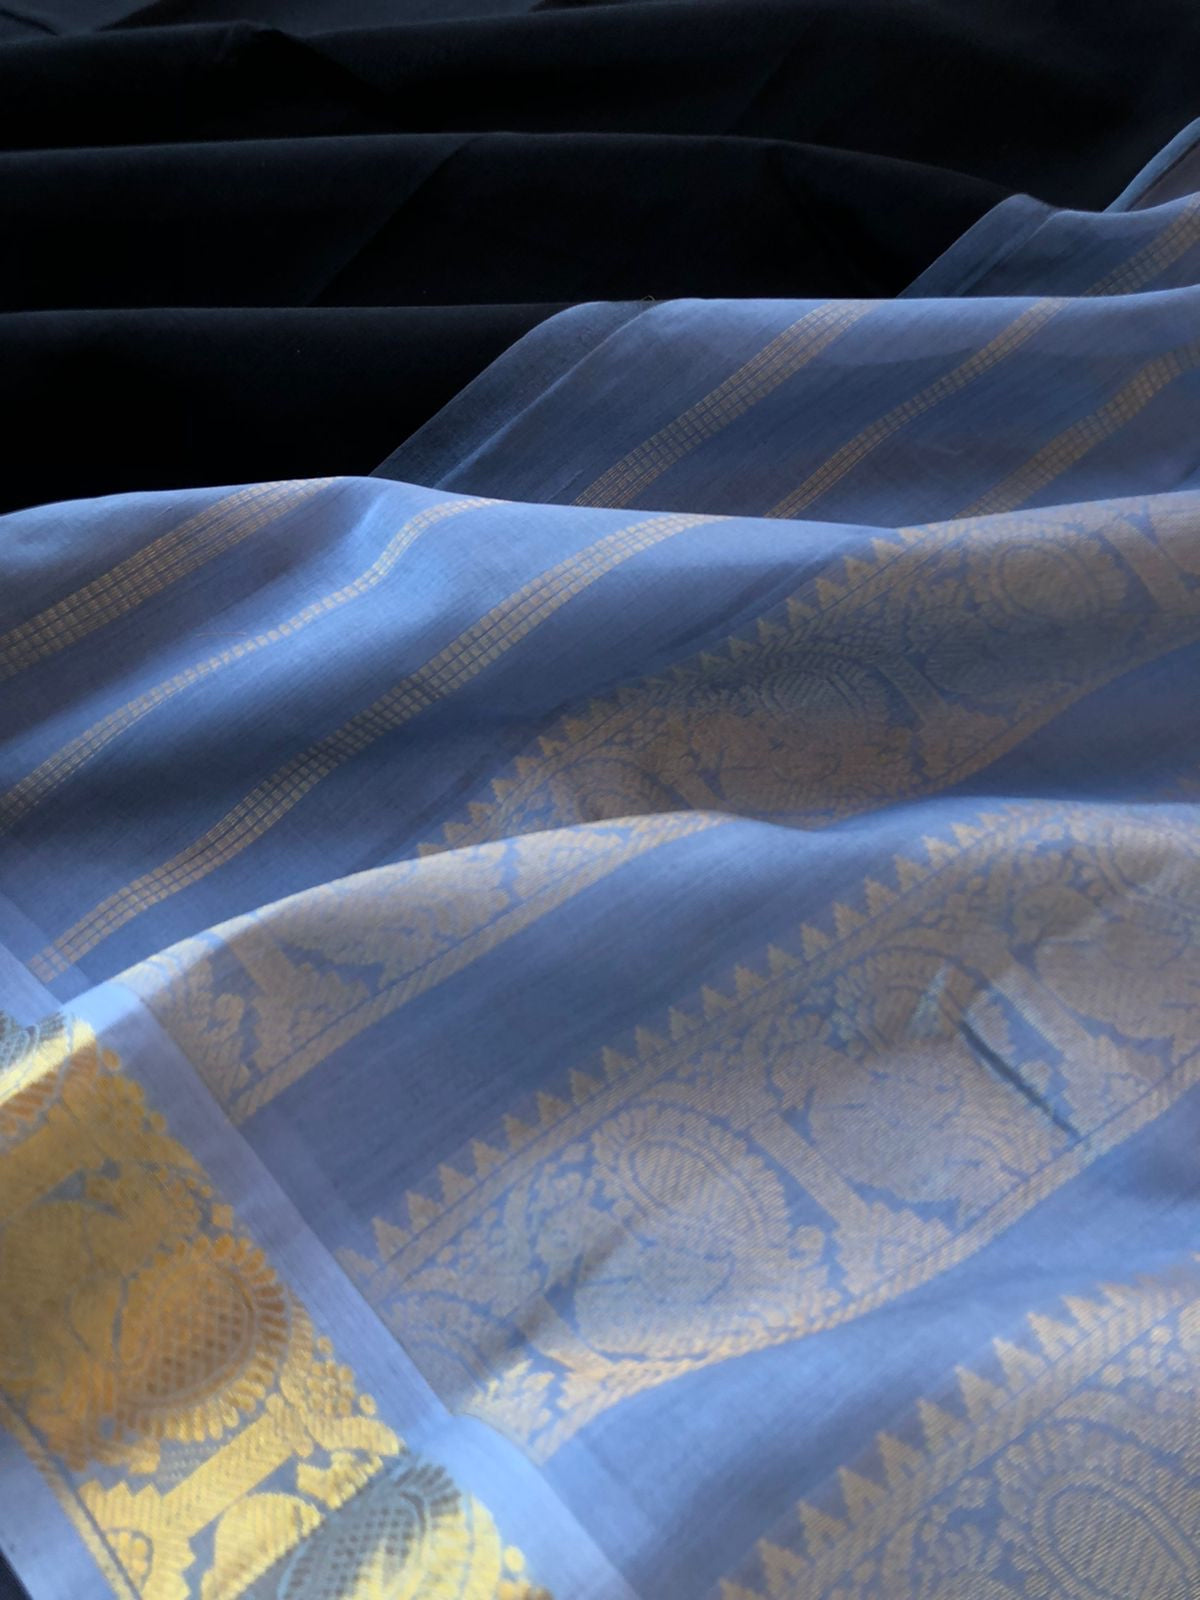 Margazhi Vibrs on Korvai Silk Cotton - charcoal blue and grey